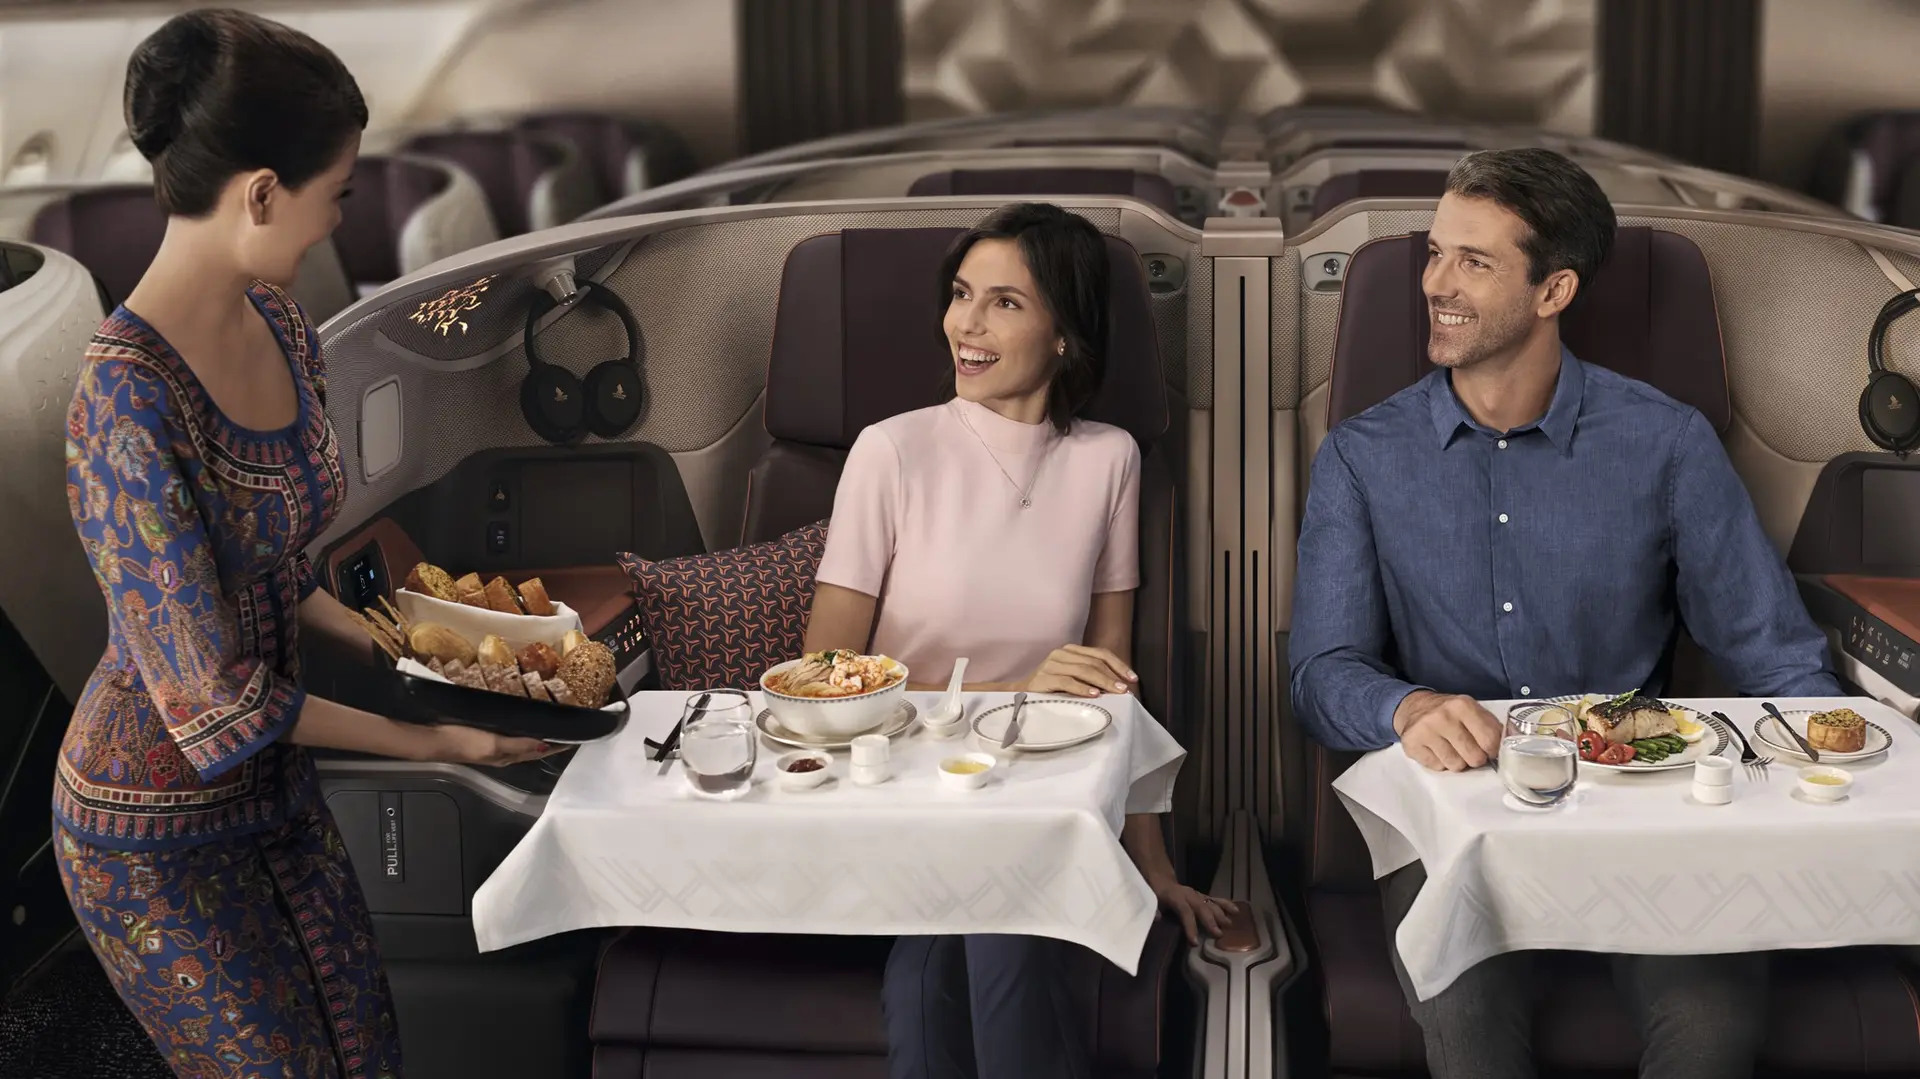 Airlines Articles - Airline Cuisine  - the Best Celebrity Menus and Flying Chefs